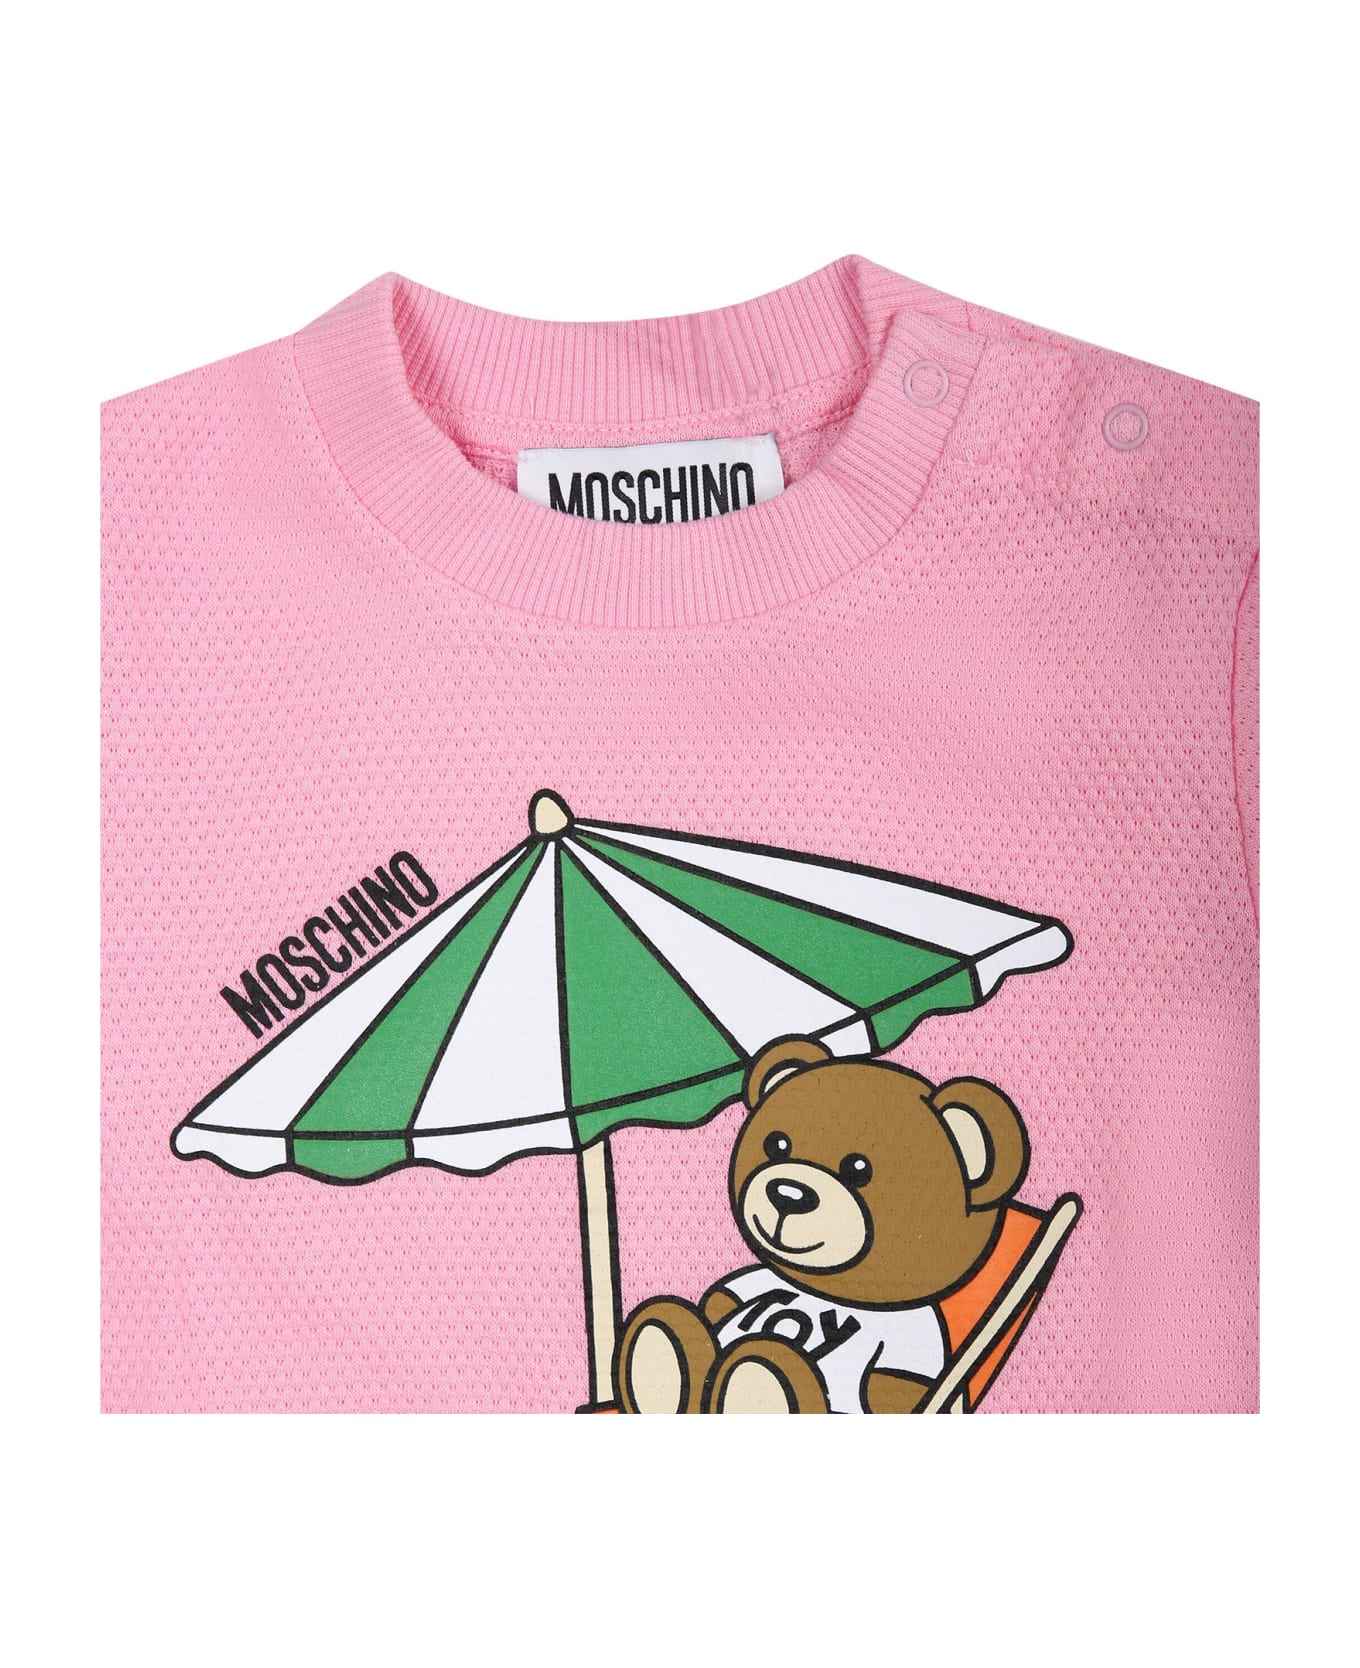 Moschino Pink Romper For Baby Girl With Teddy Bear - Pink